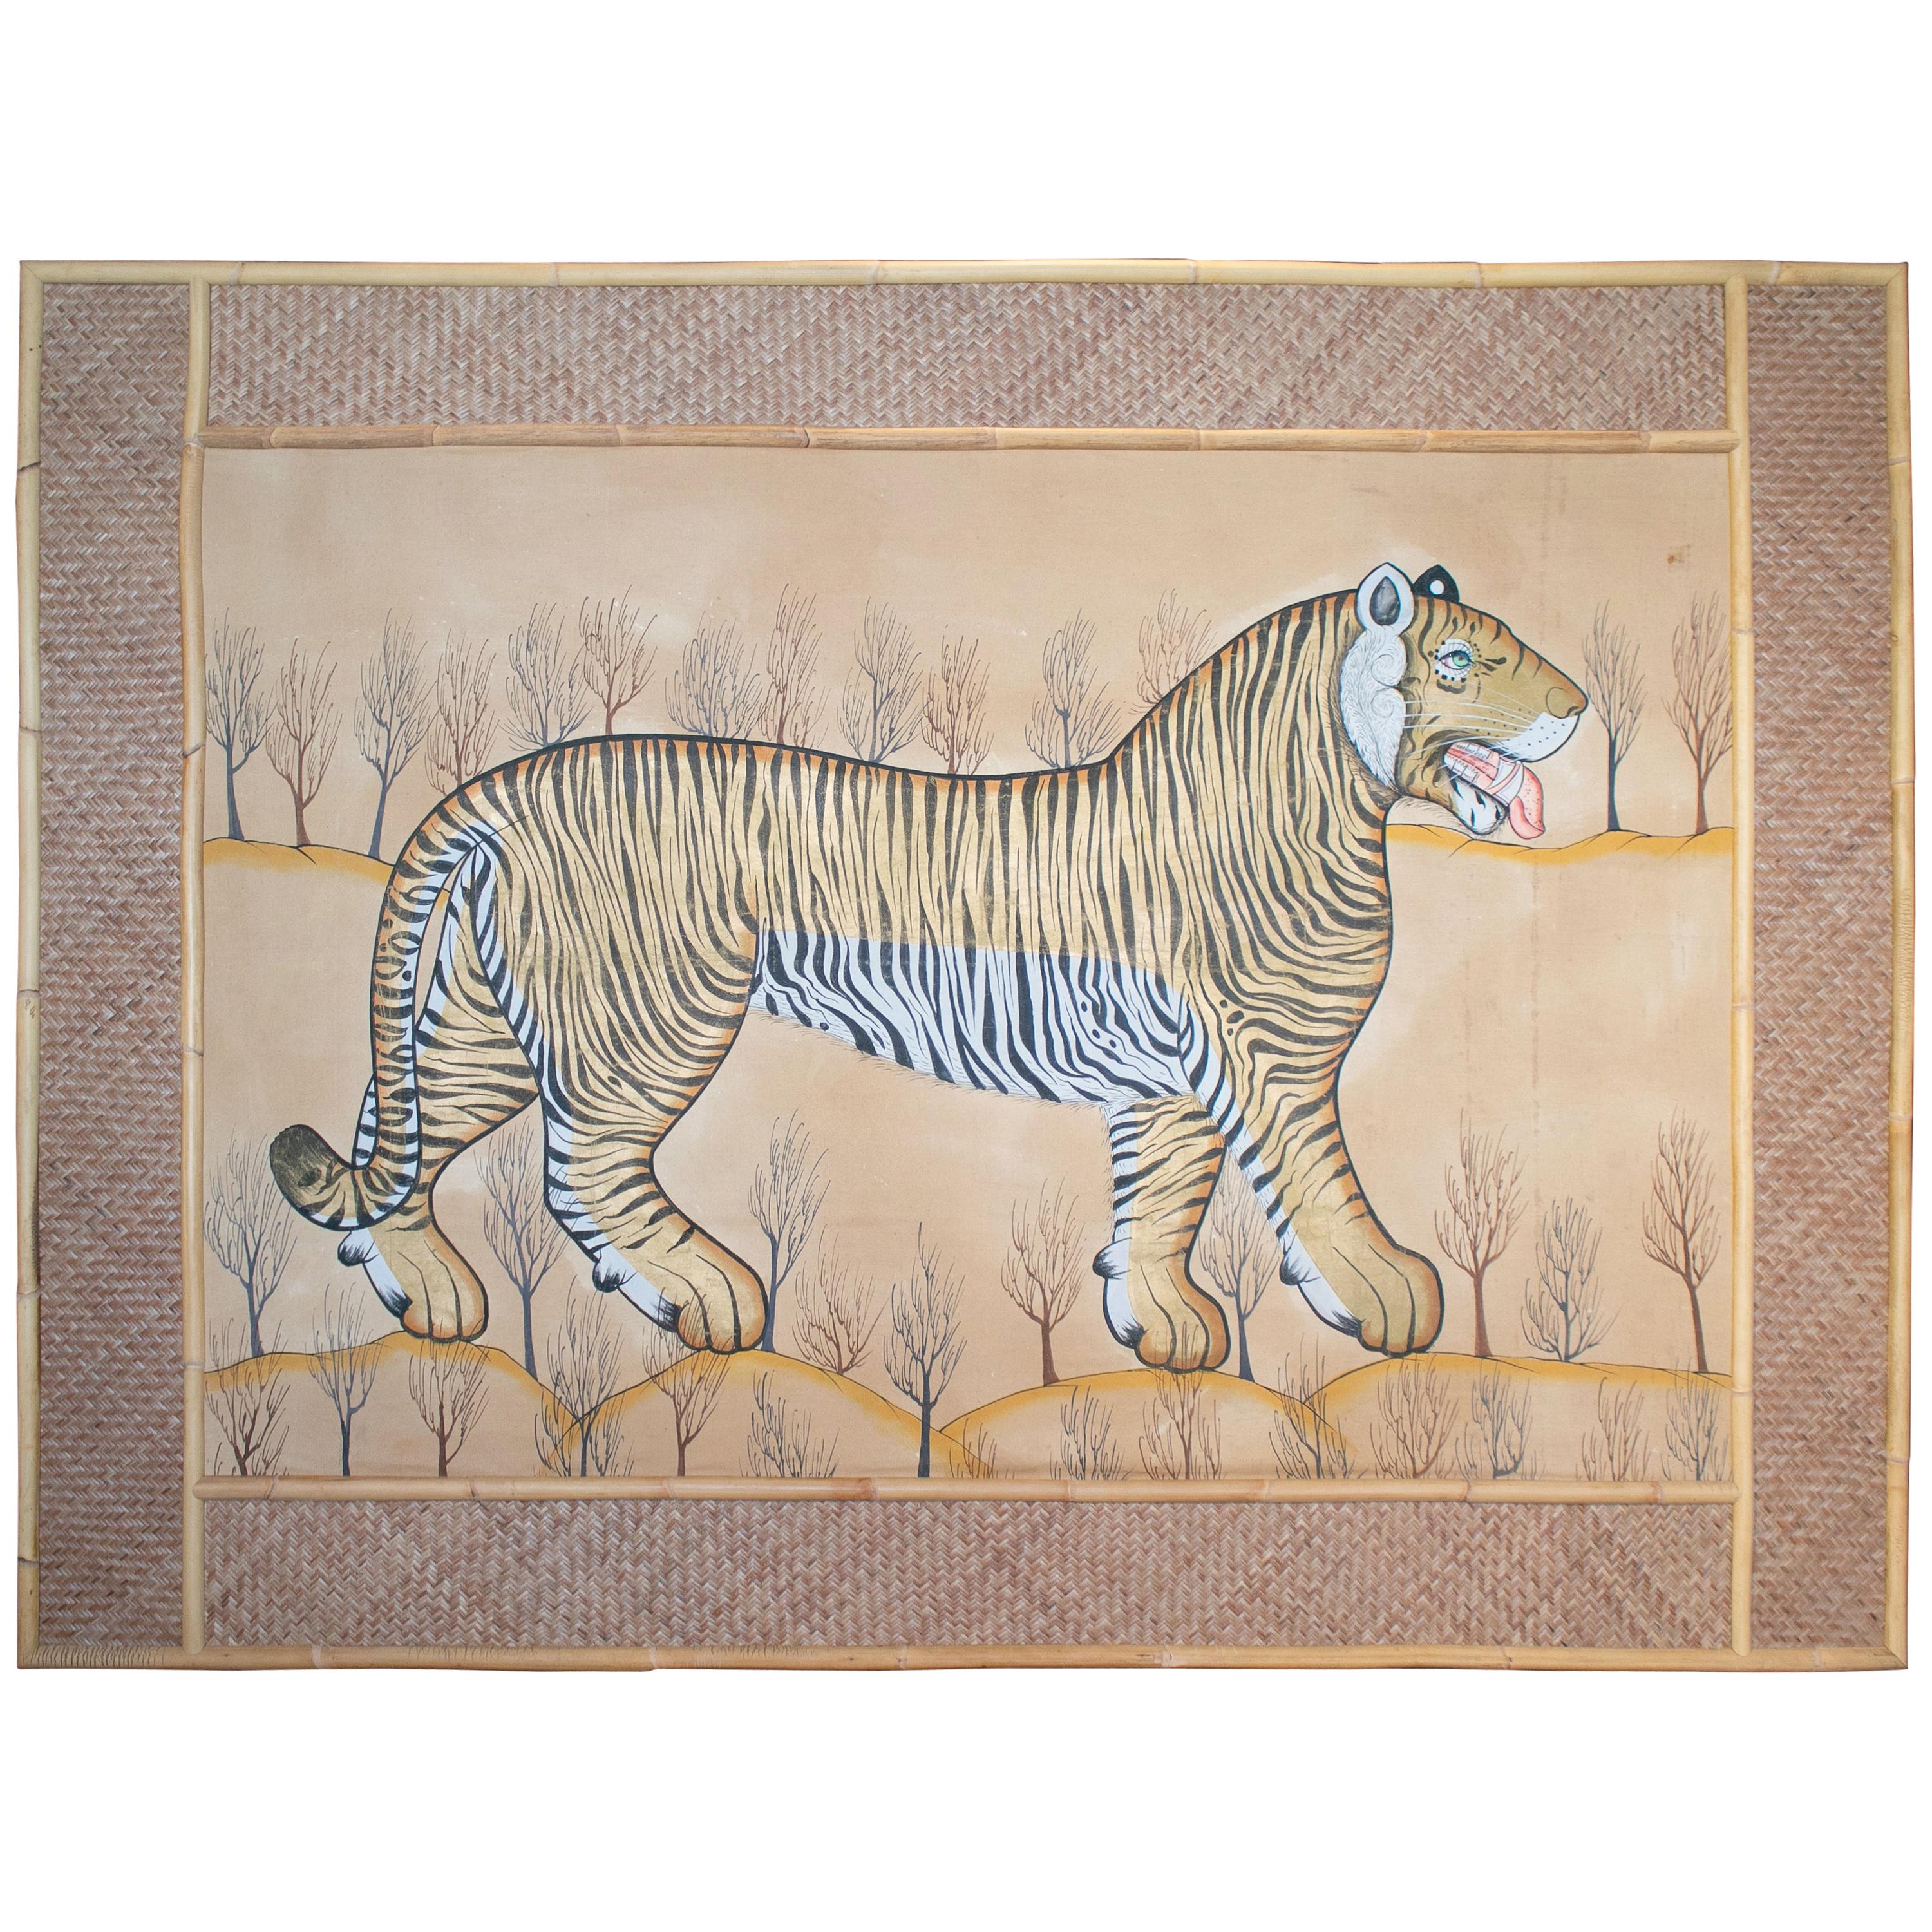 Jaime Parlade Designed Tiger Drawn on Fabric and Framed in Bamboo & Indian Straw